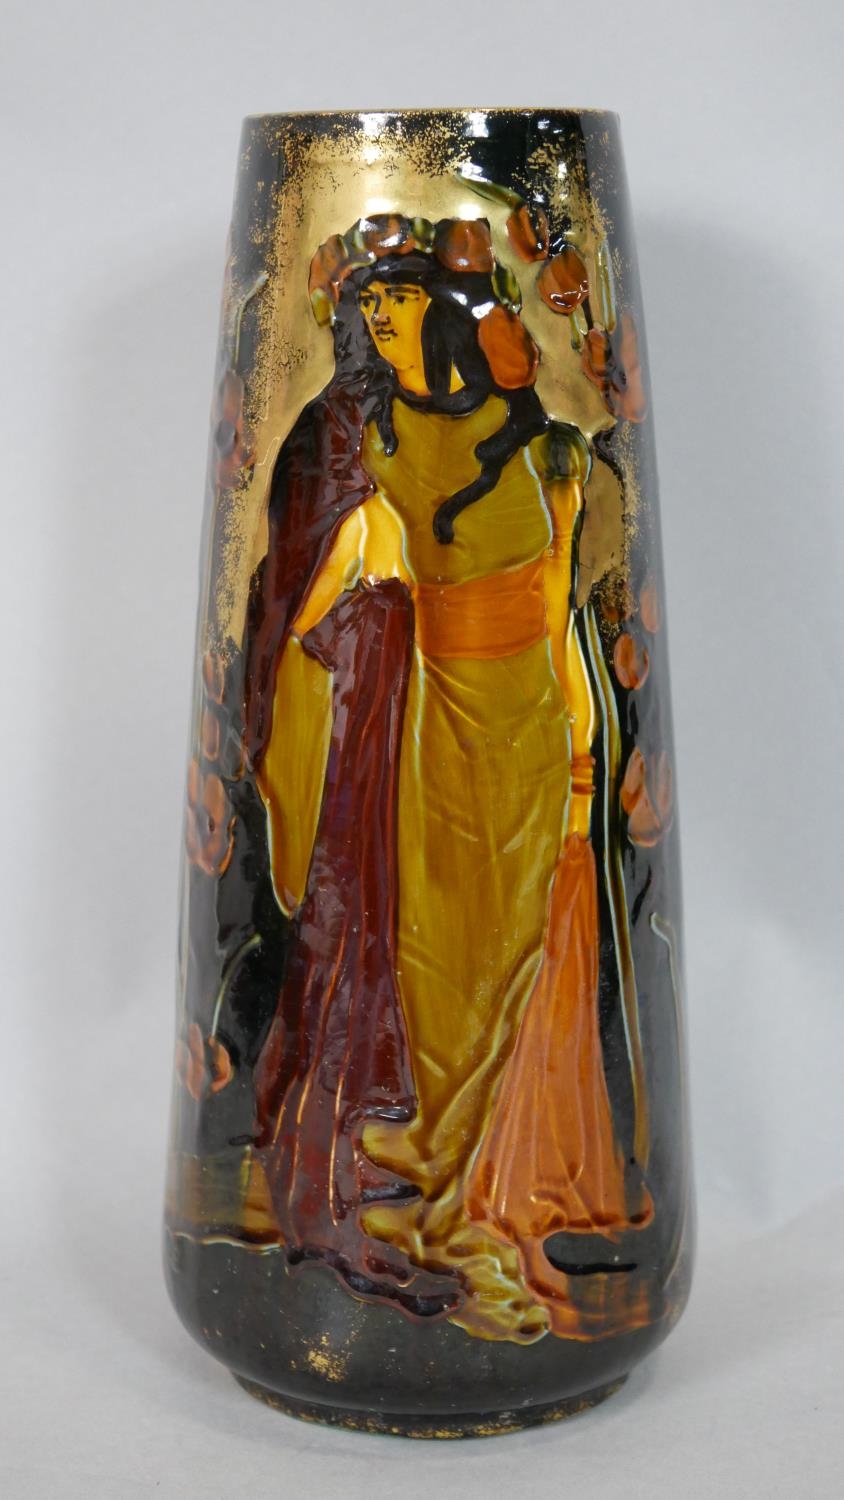 A collection of Royal Stanleyware Jacobean ceramics, a tall vase with figural gilded decoration, a - Image 2 of 9